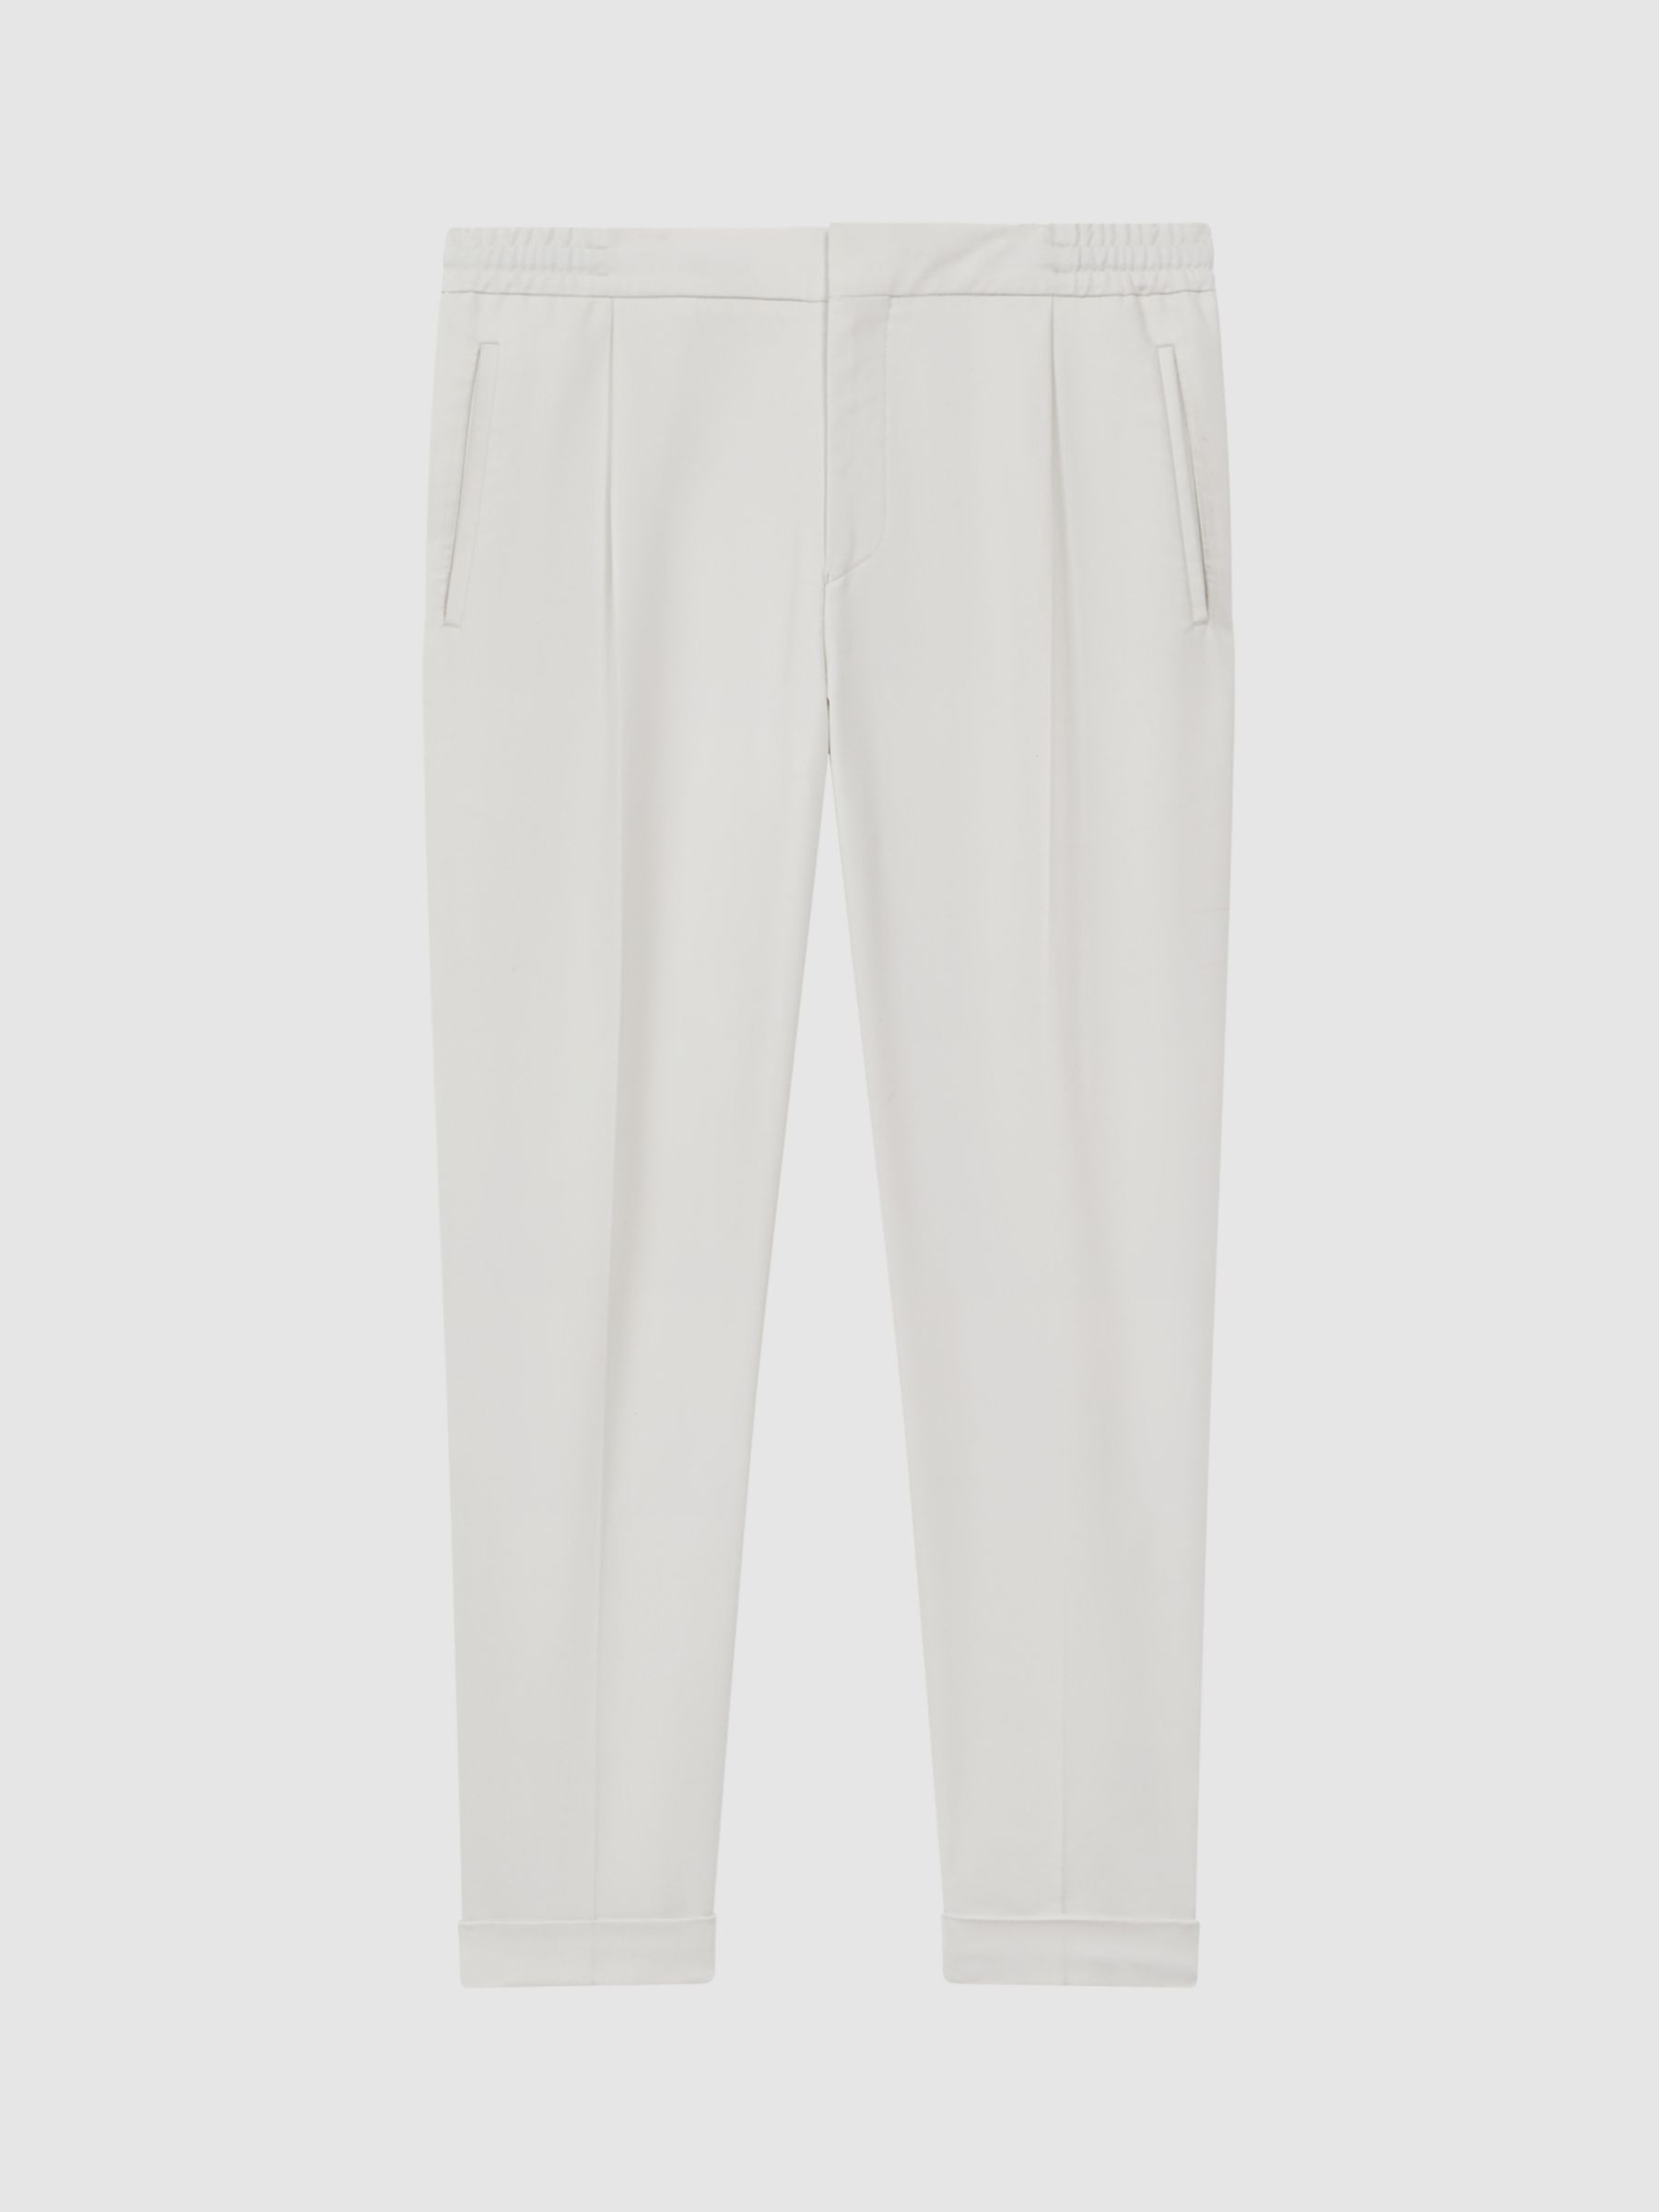 Reiss Brighton Pleated Relaxed Trousers, Ecru, 28R